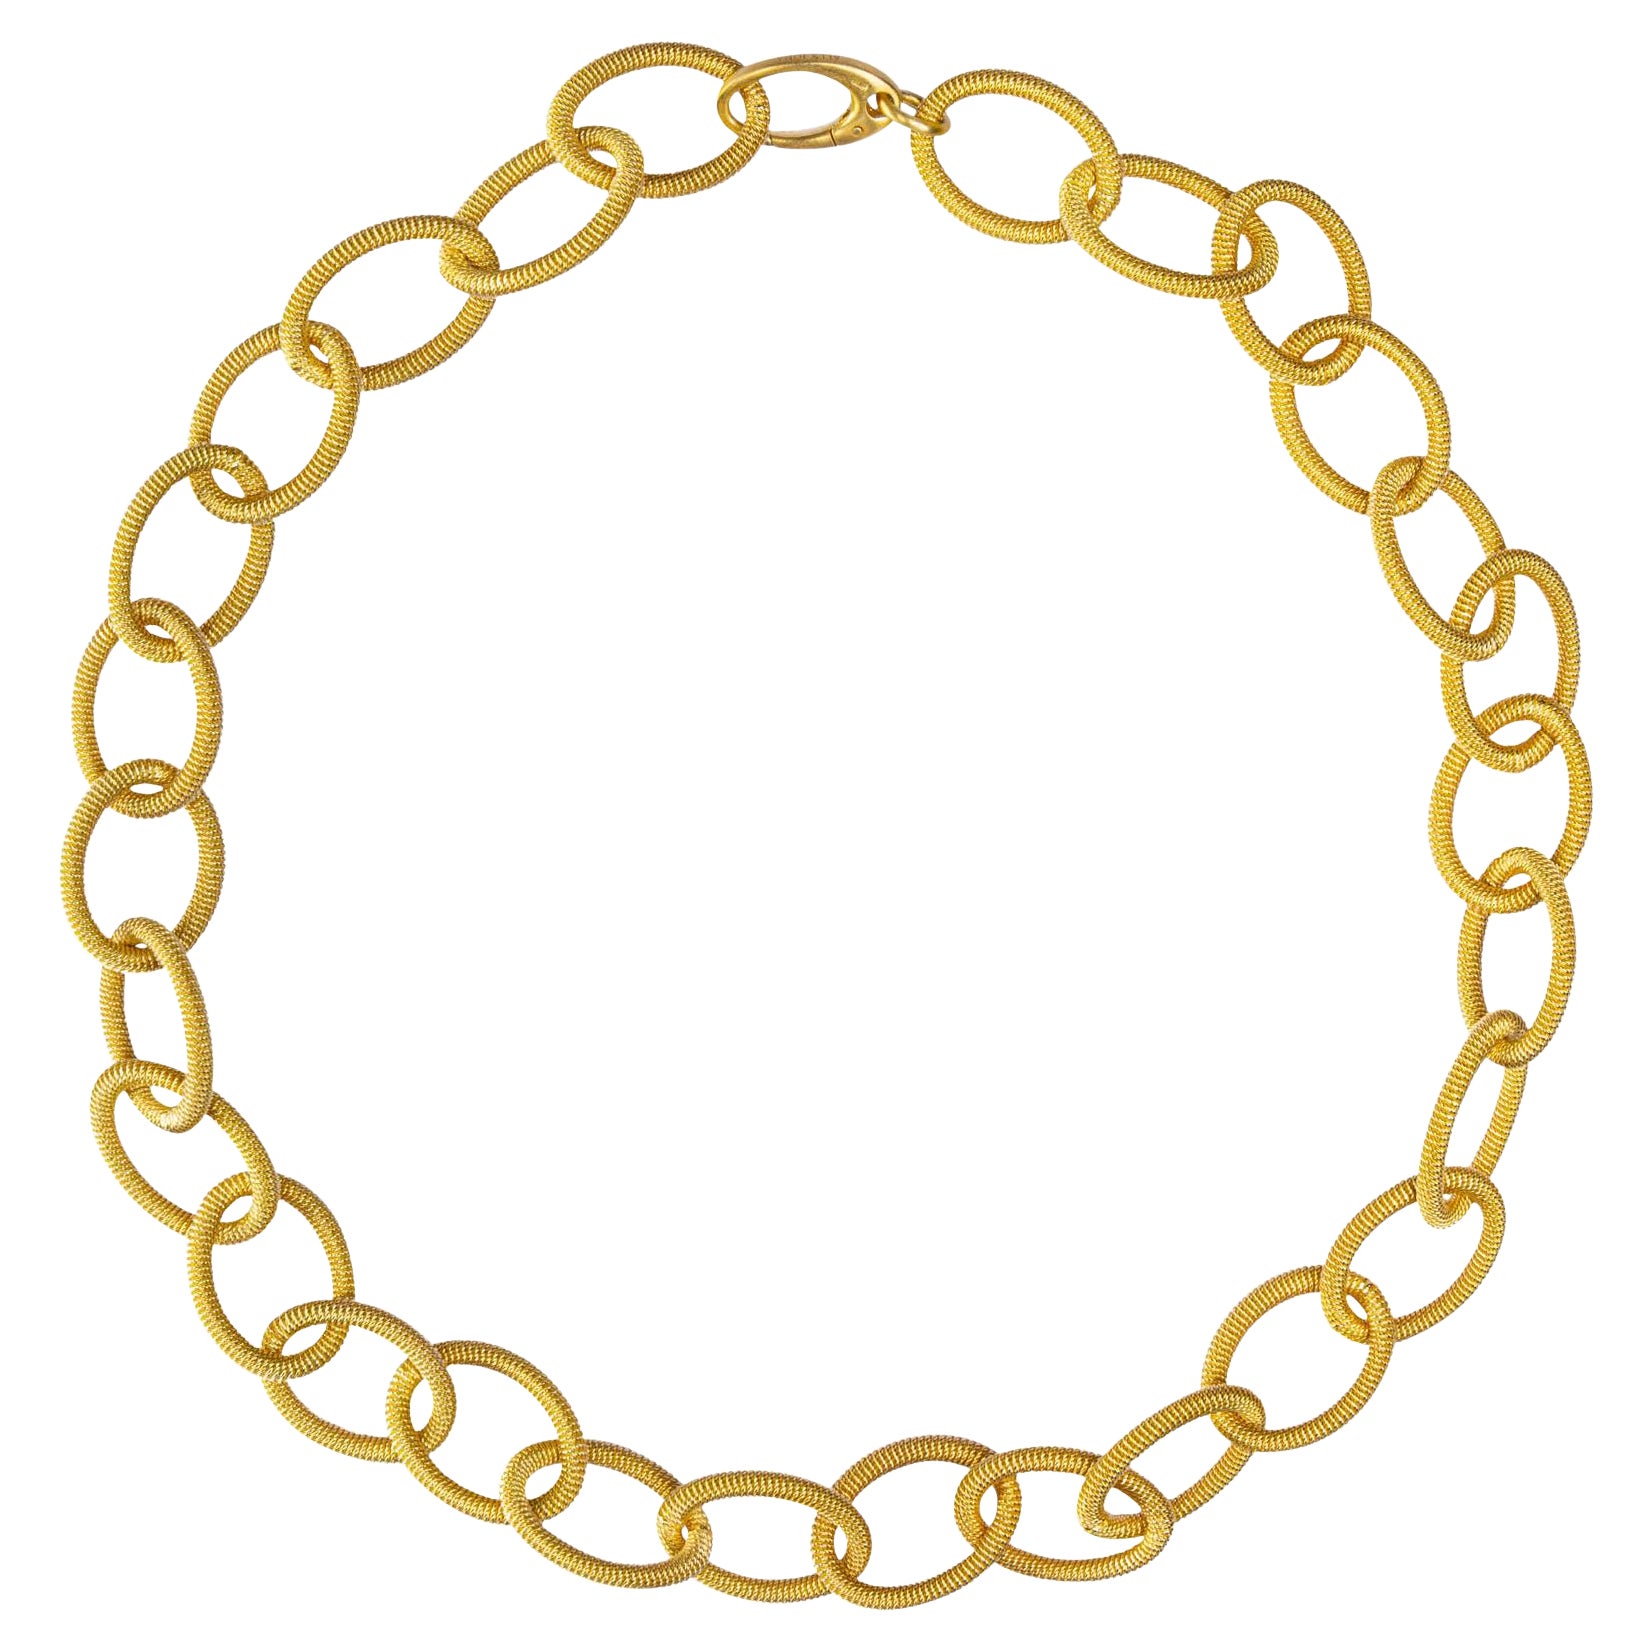 Alex Jona Gold Plated Sterling Silver Twisted Wire Chain Link Necklace For Sale